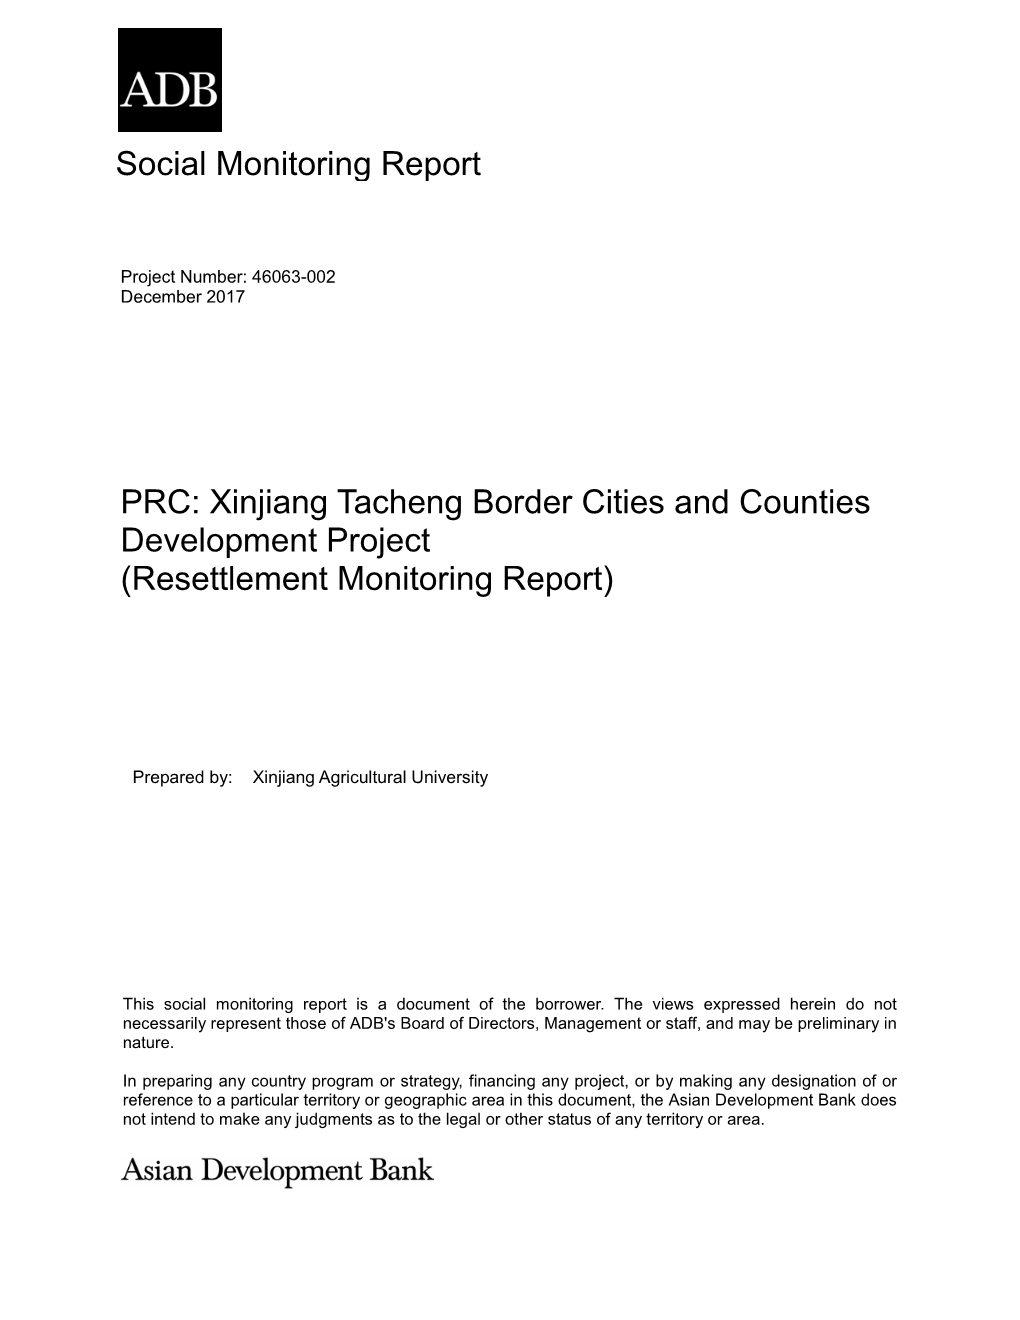 Xinjiang Tacheng Border Cities and Counties Development Project (Resettlement Monitoring Report)